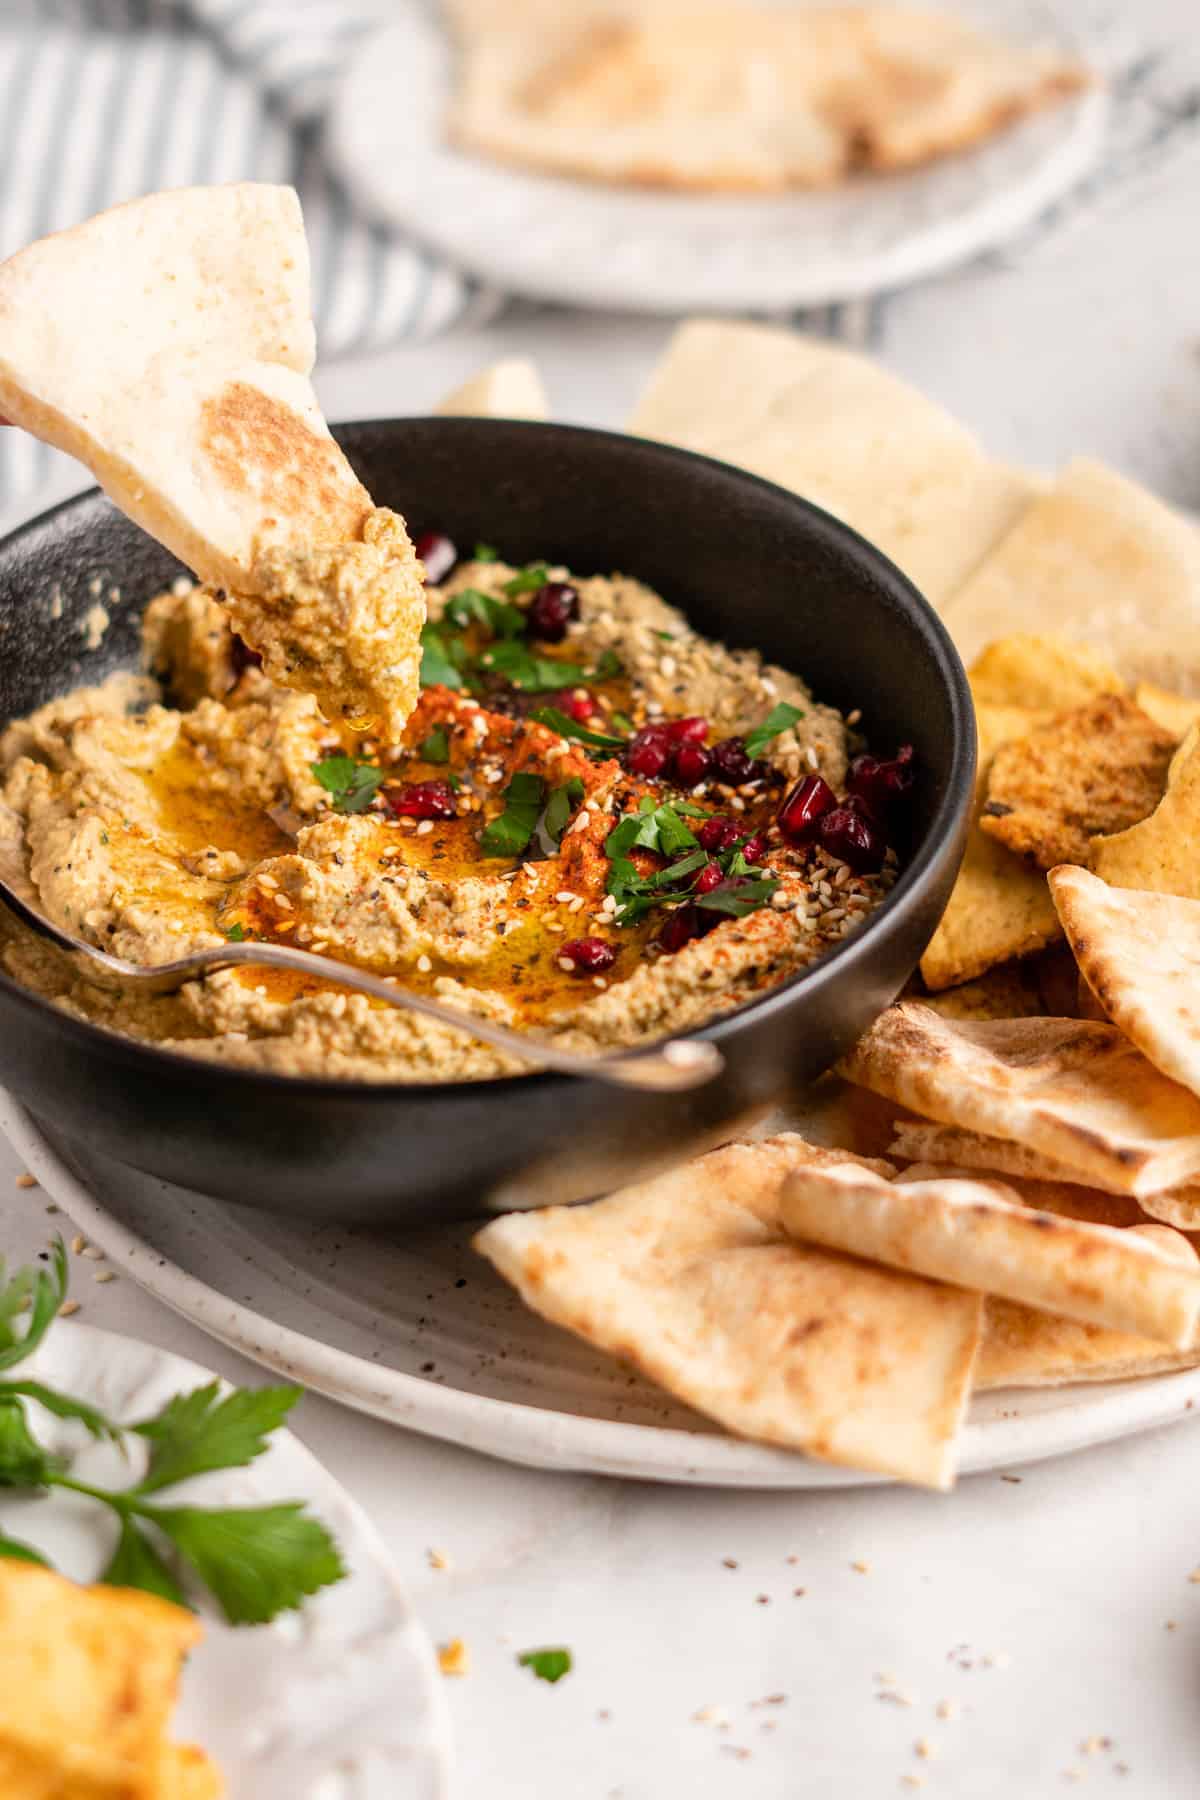 Baba ghanoush in bowl surrounded by triangles of pita on plate